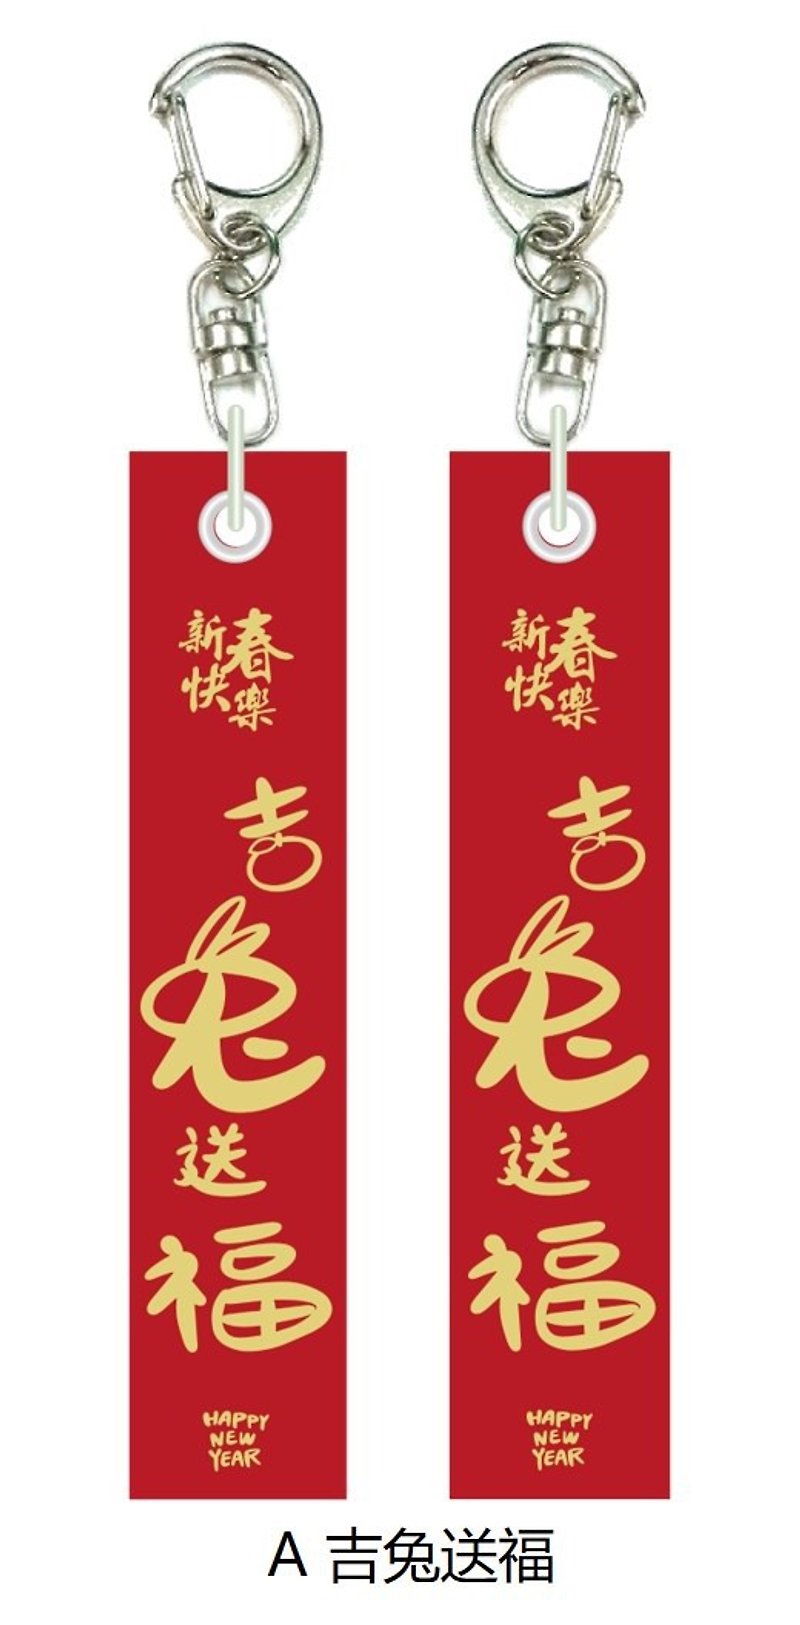 [Chinese New Year Items] Ribbon Key Ring - Keychains - Other Man-Made Fibers 